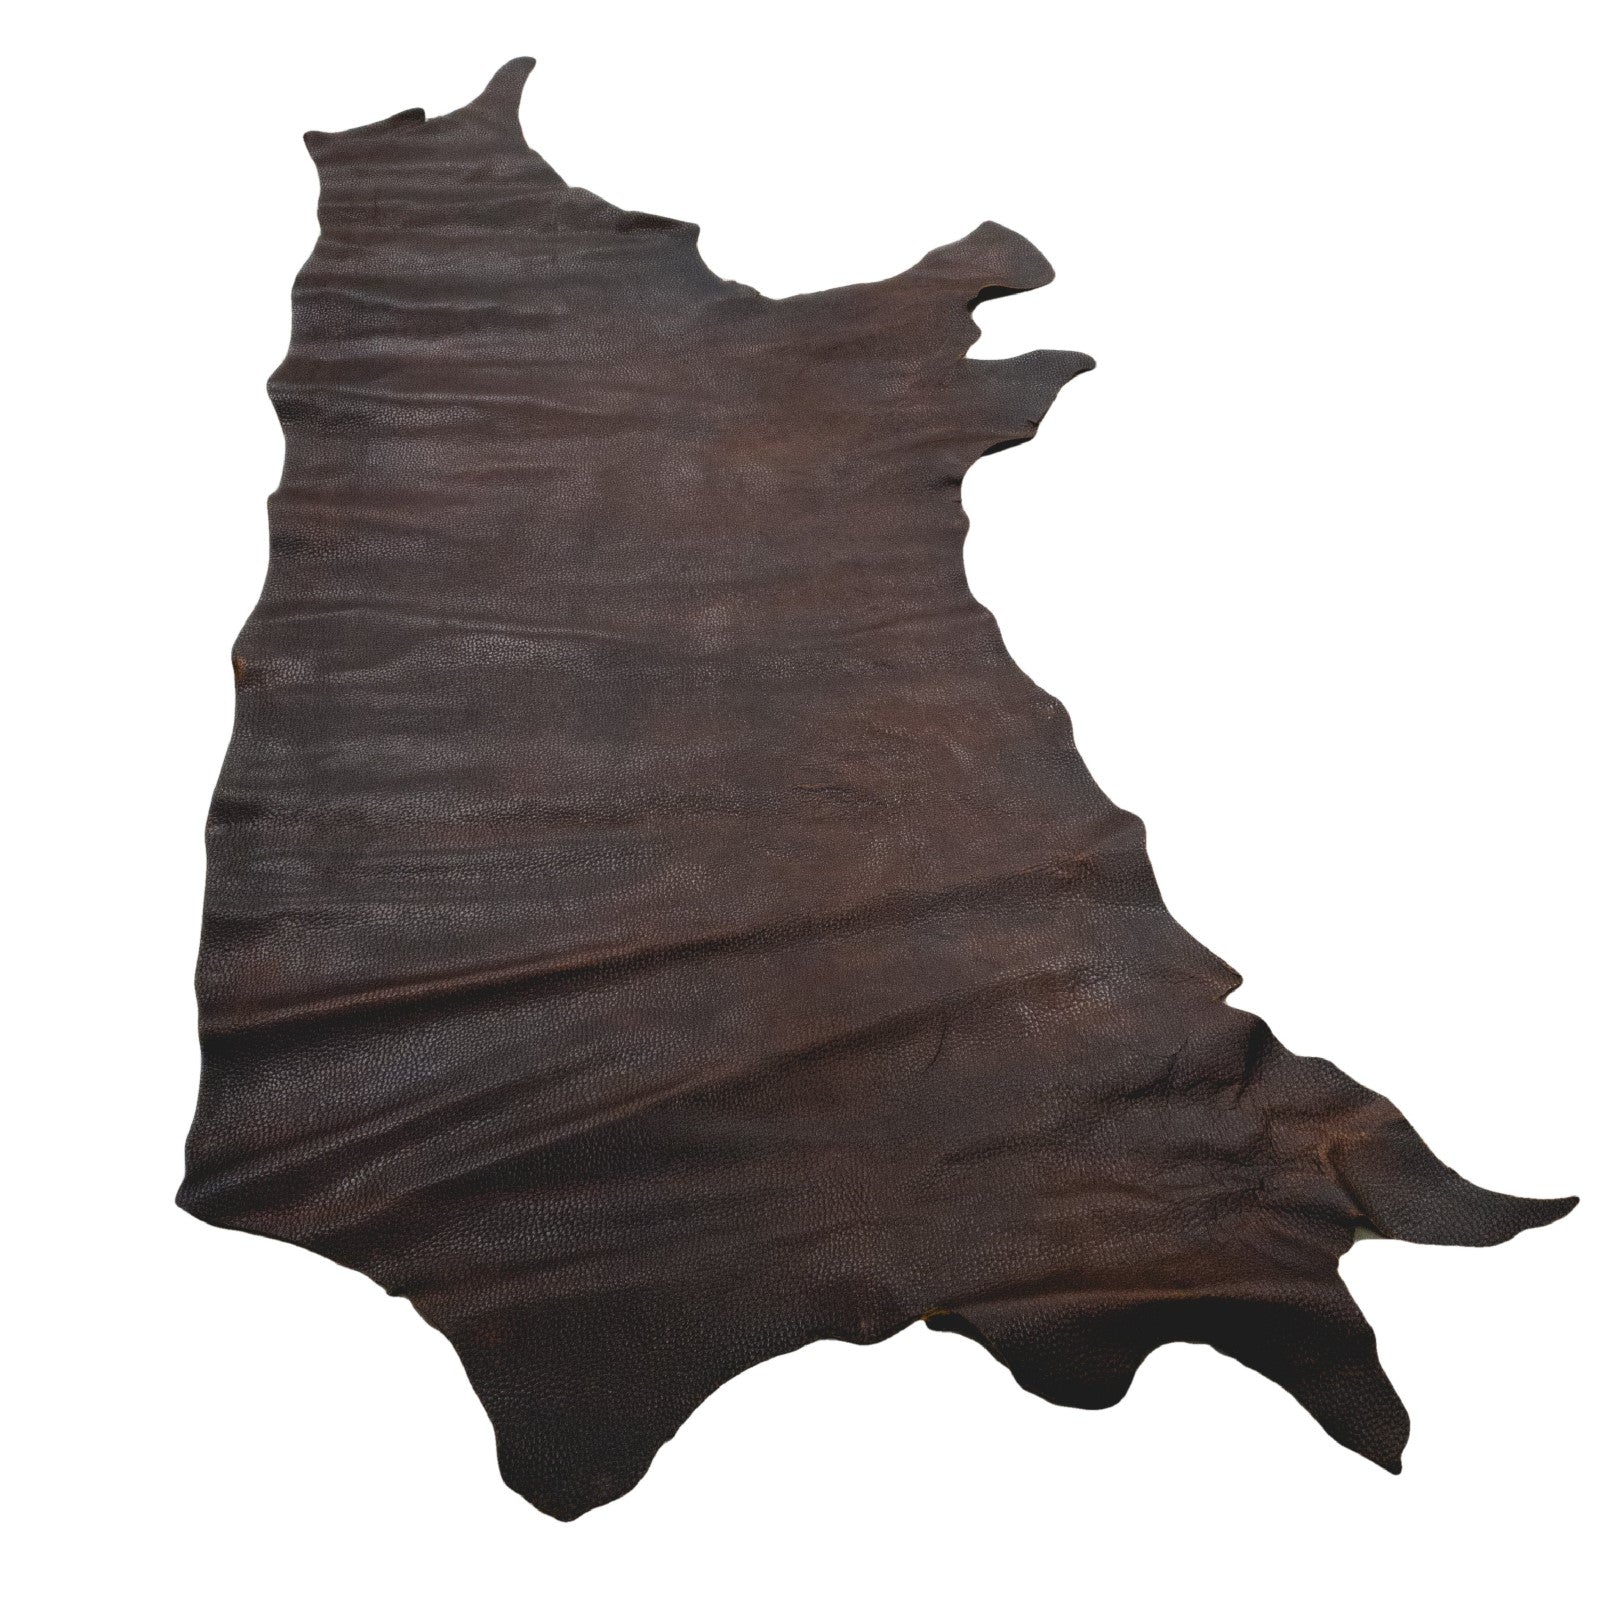 Parachute Pull-up Brown 4-5 oz, 10-29 SqFt, Flyin' Bison Sides and Project Pieces, Side / 12-14 Sq Ft | The Leather Guy